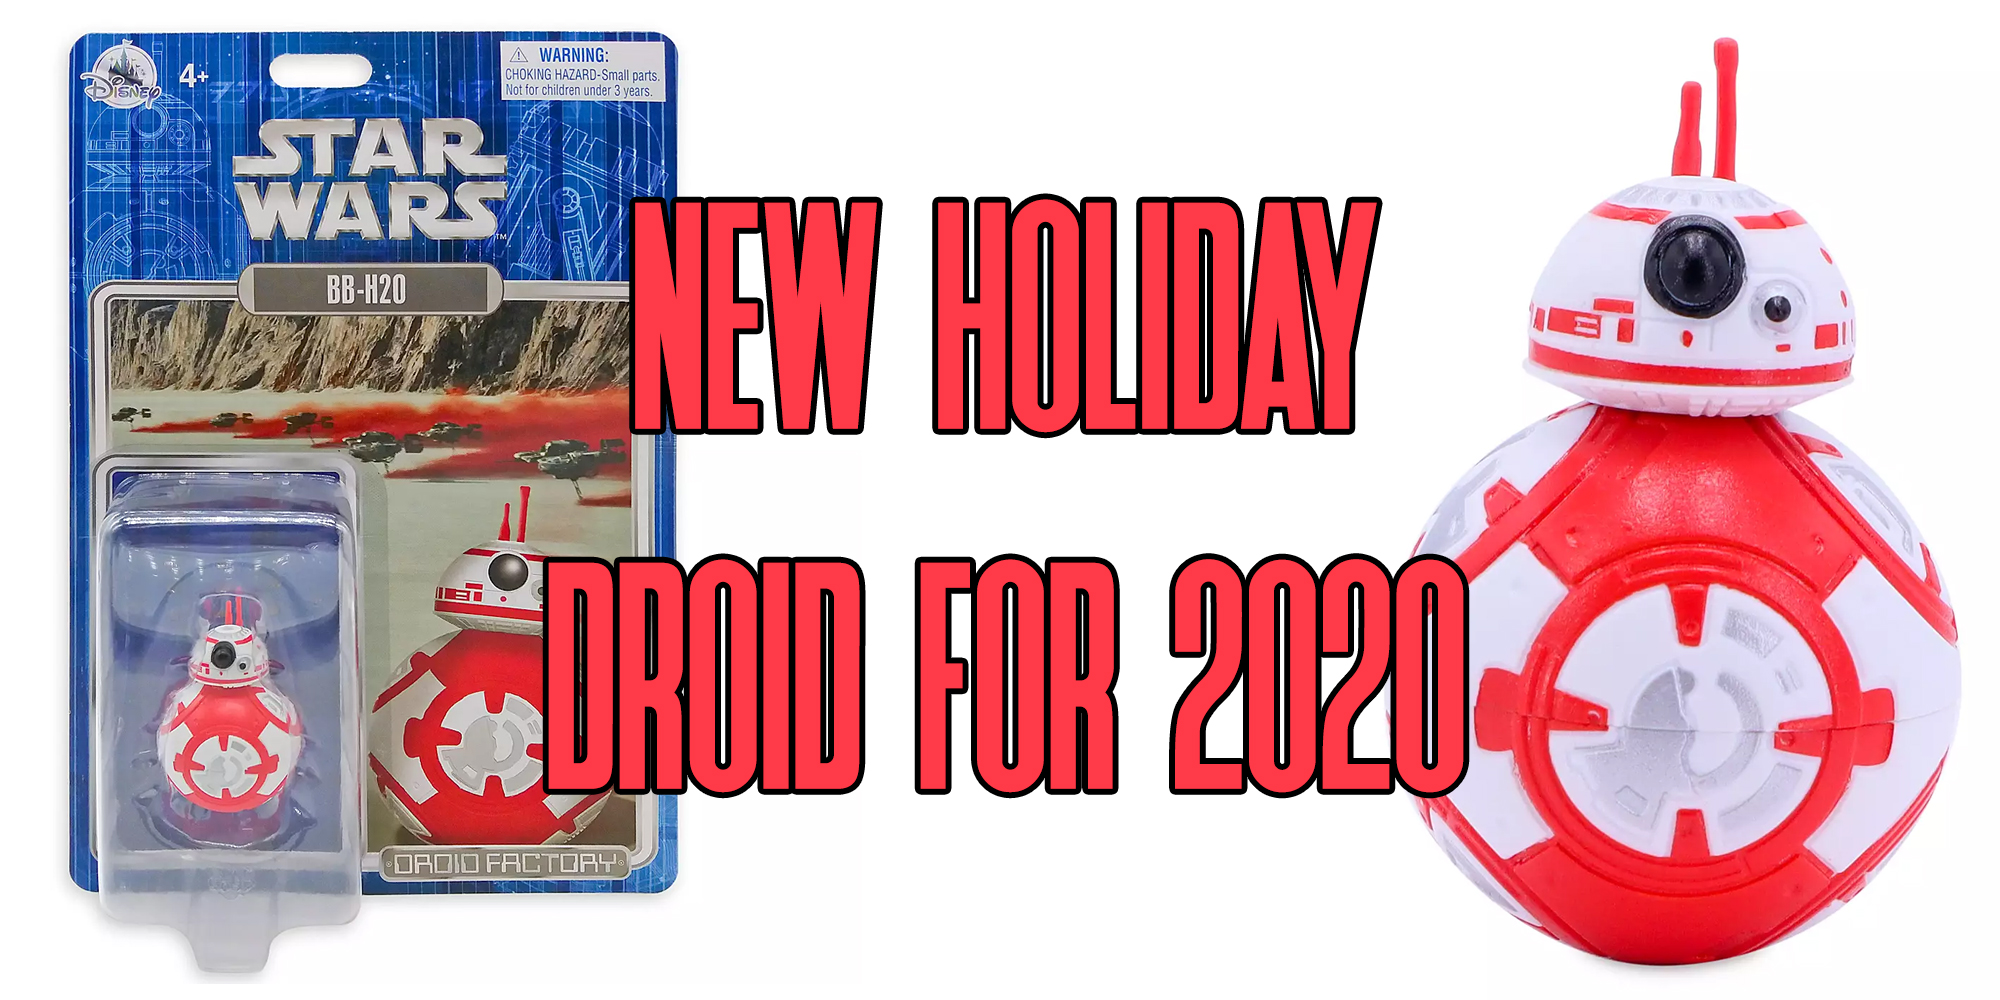 BB-H20 | Disney's 2020 Holiday Droid Revealed